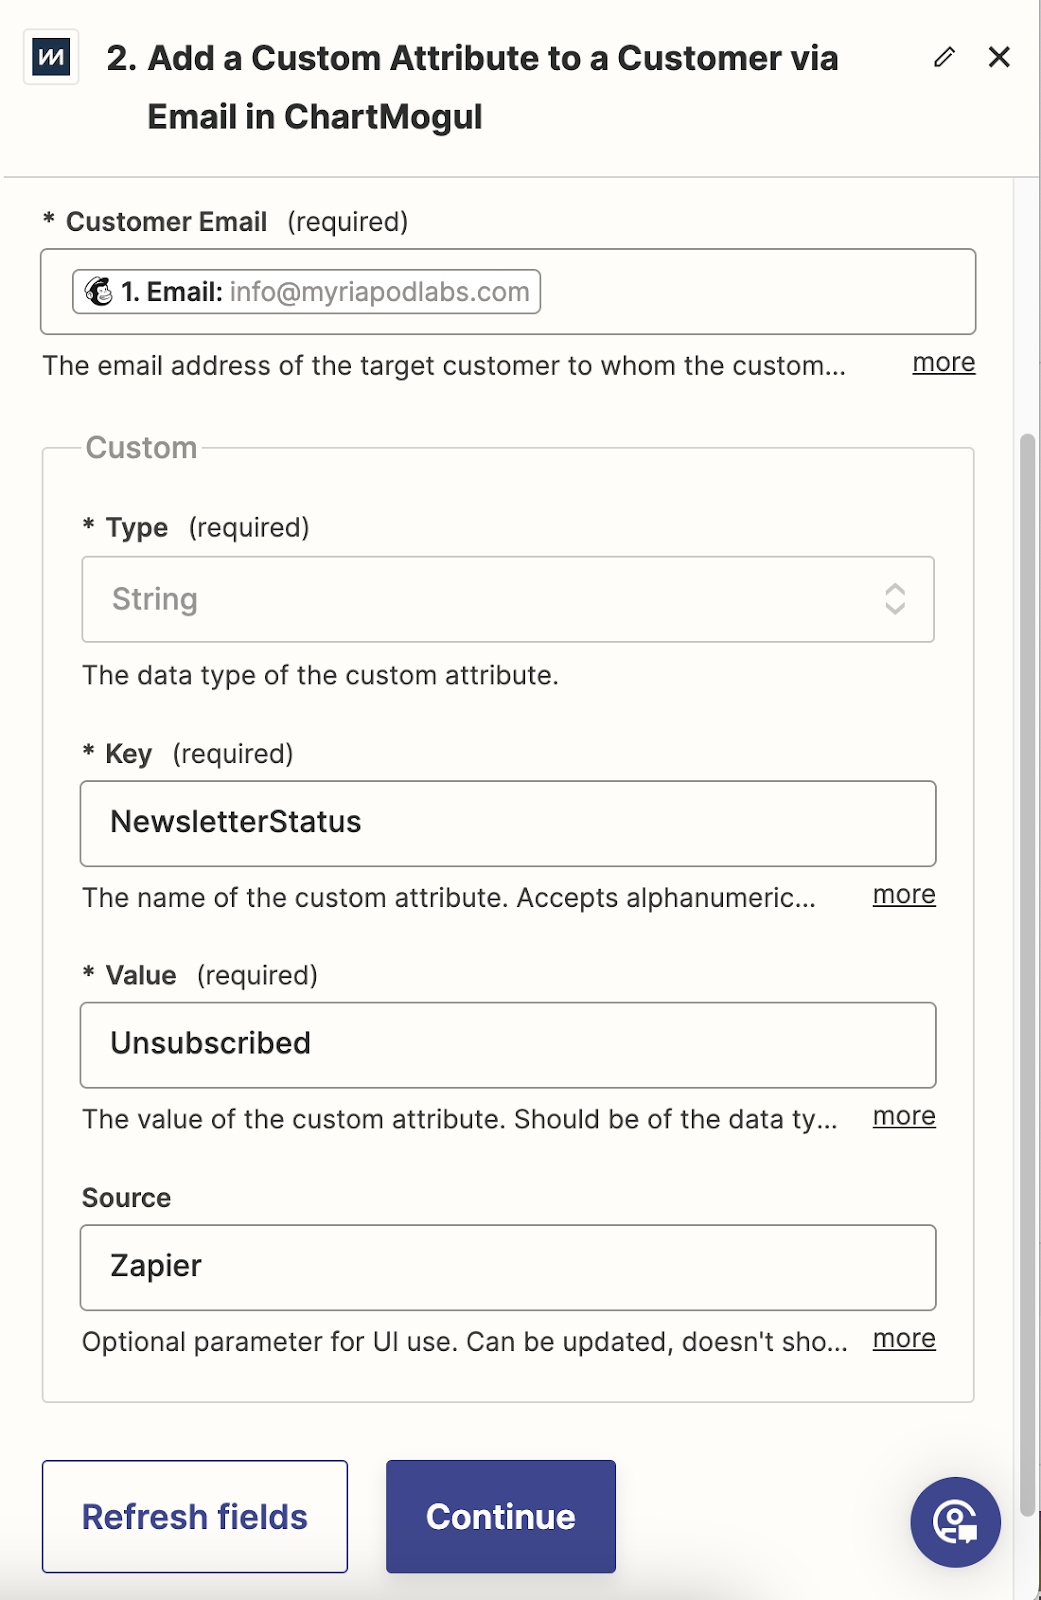 Screenshot of the section for adding custom attributes to ChartMogul with fields as described here and two buttons: Refresh fields, and Continue.